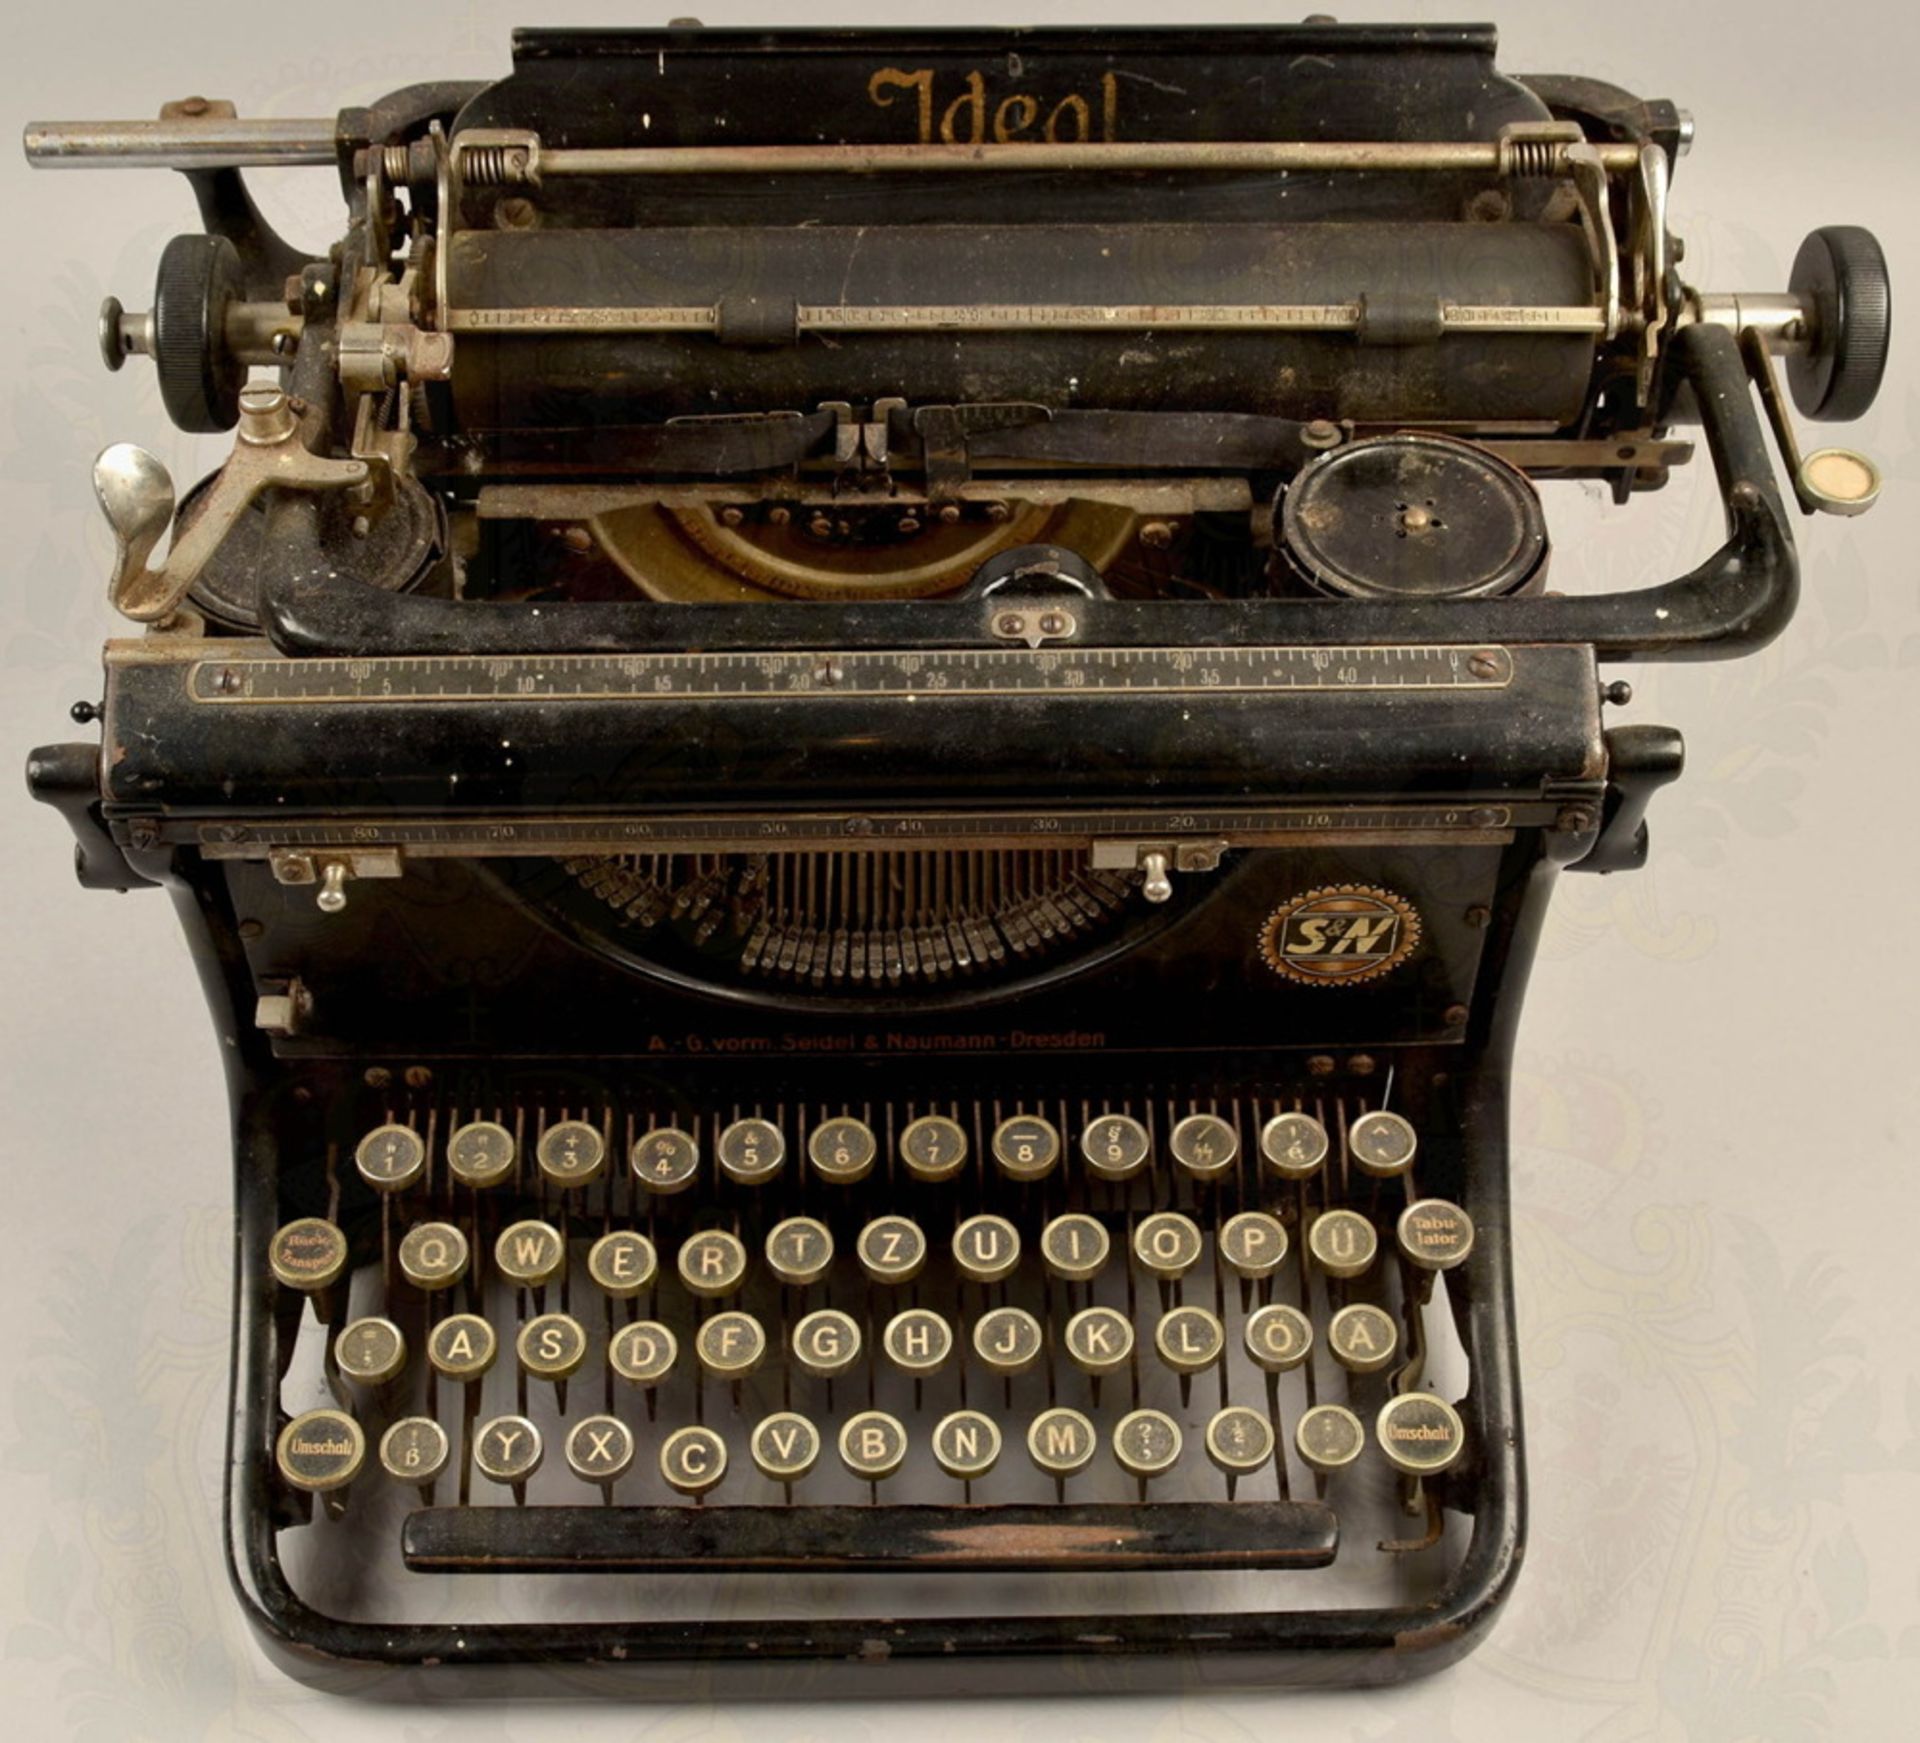 Waffen-SS office typewriter Ideal with runes key - Image 2 of 5